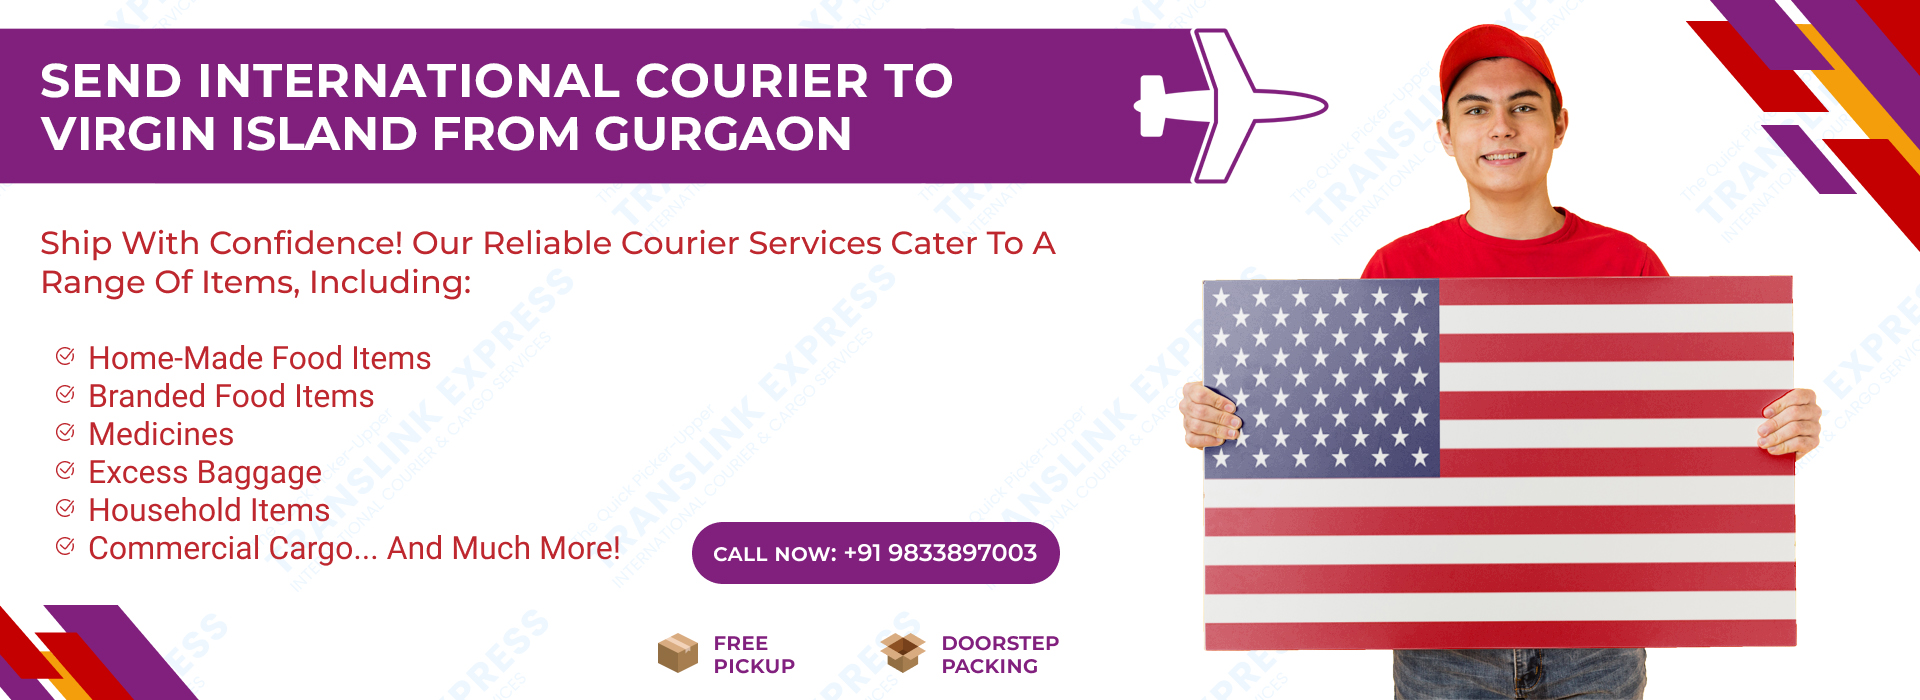 Courier to Virgin Island From Gurgaon